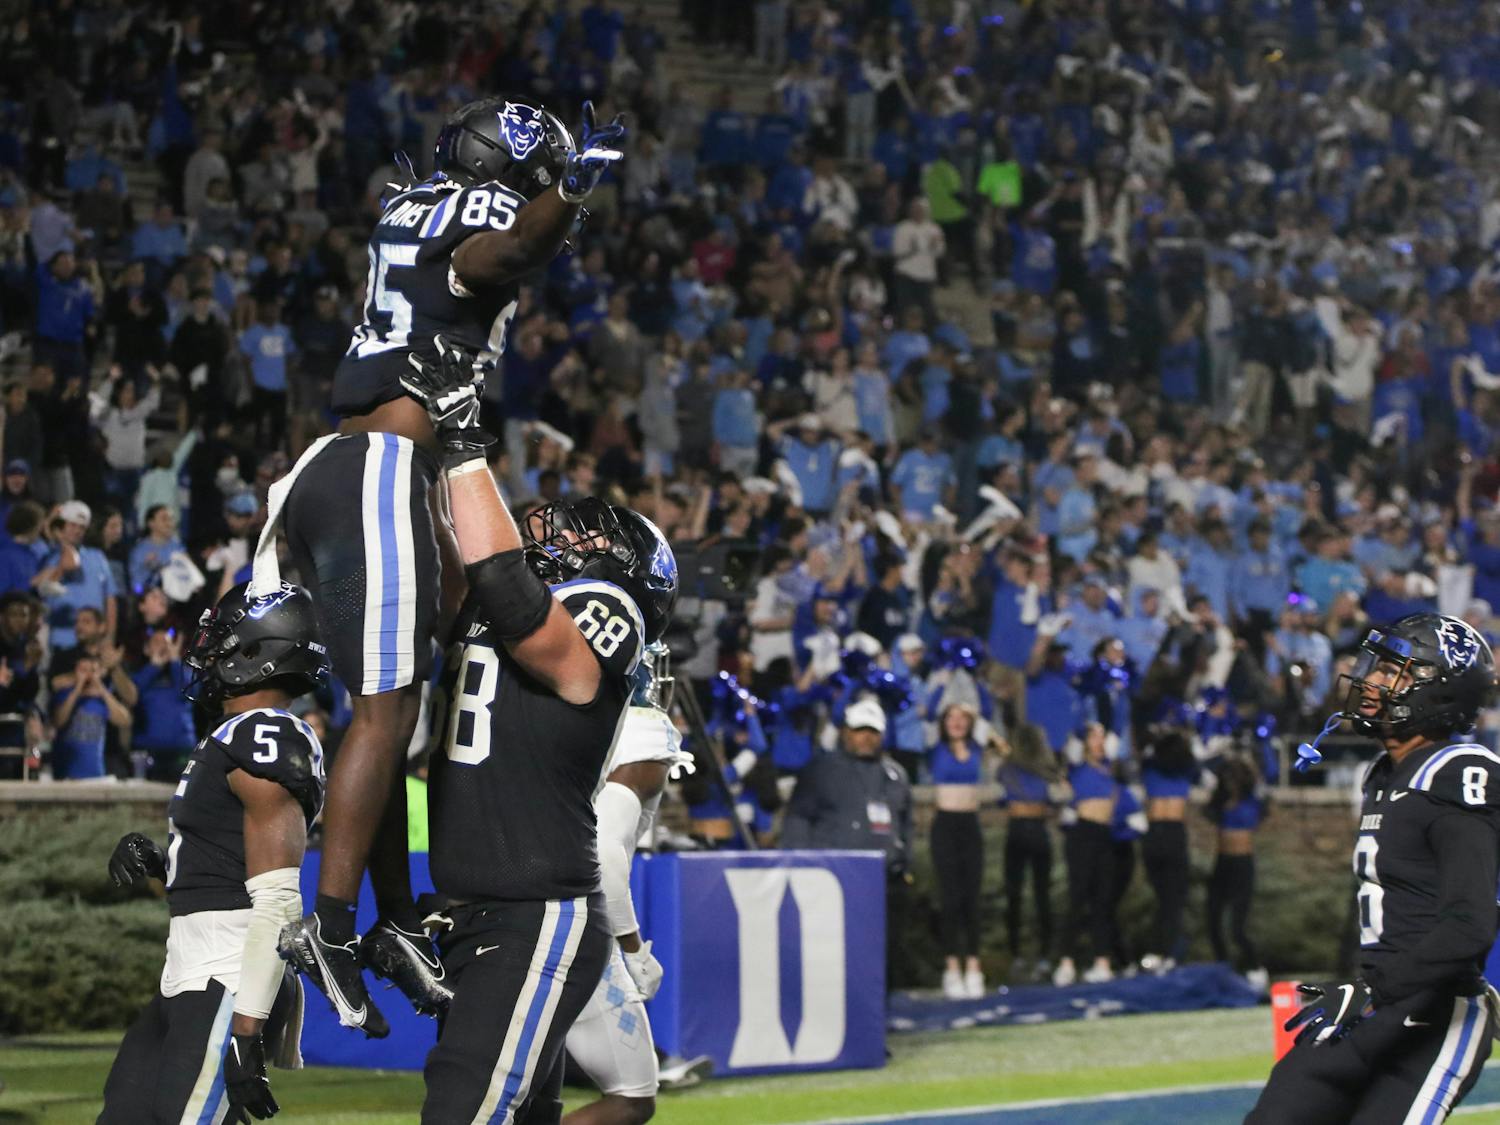 Duke and North Carolina put on a show Saturday in Durham, but the Tar Heels came out on top.